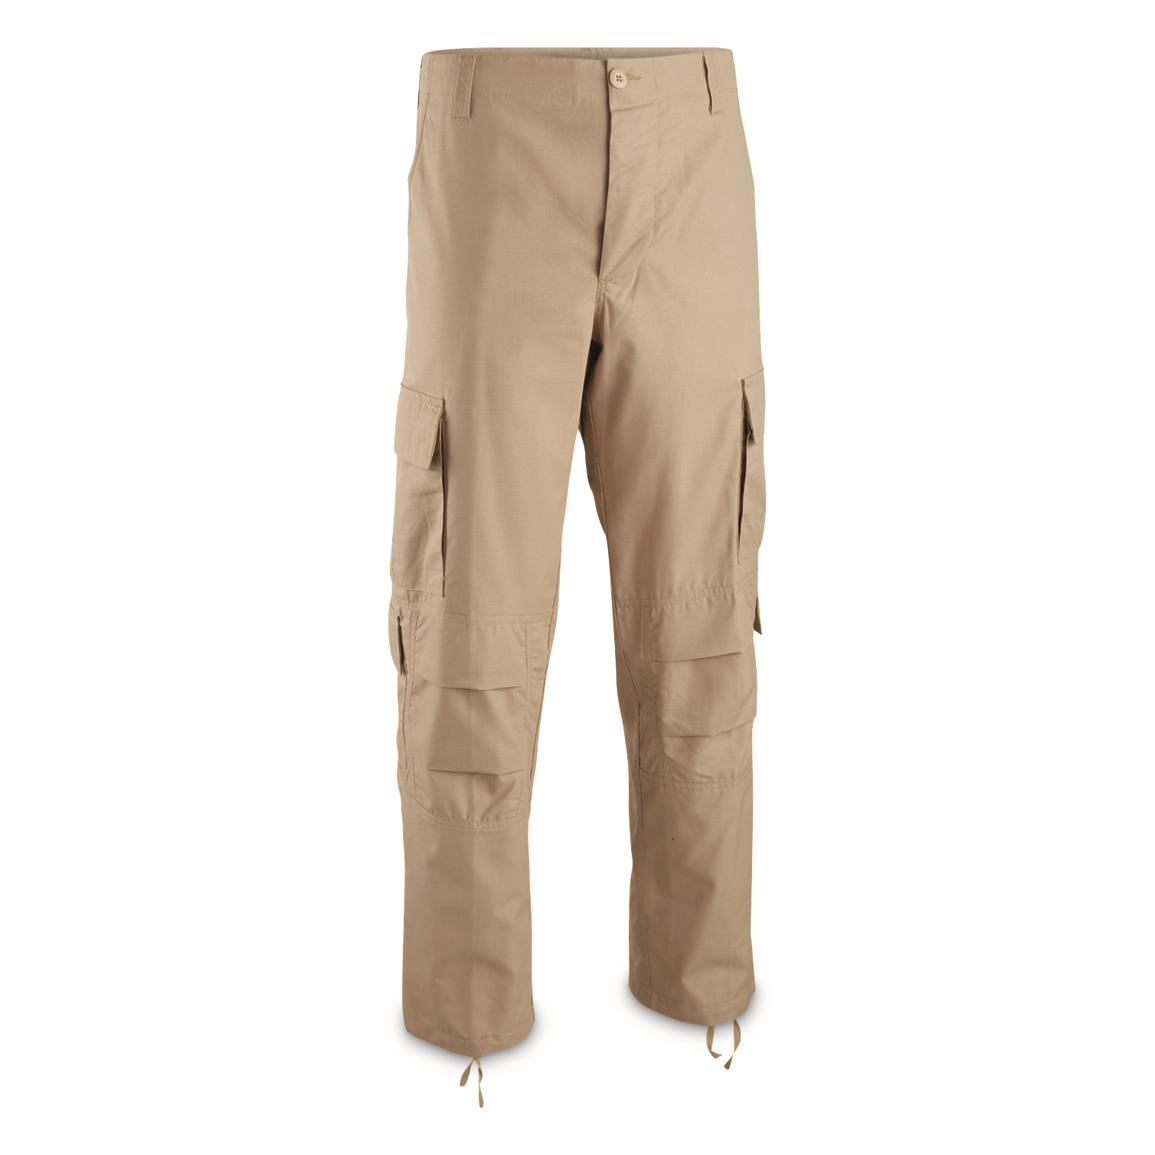 HQ ISSUE U.S. Military Style Ripstop BDU Pants, Tan 499